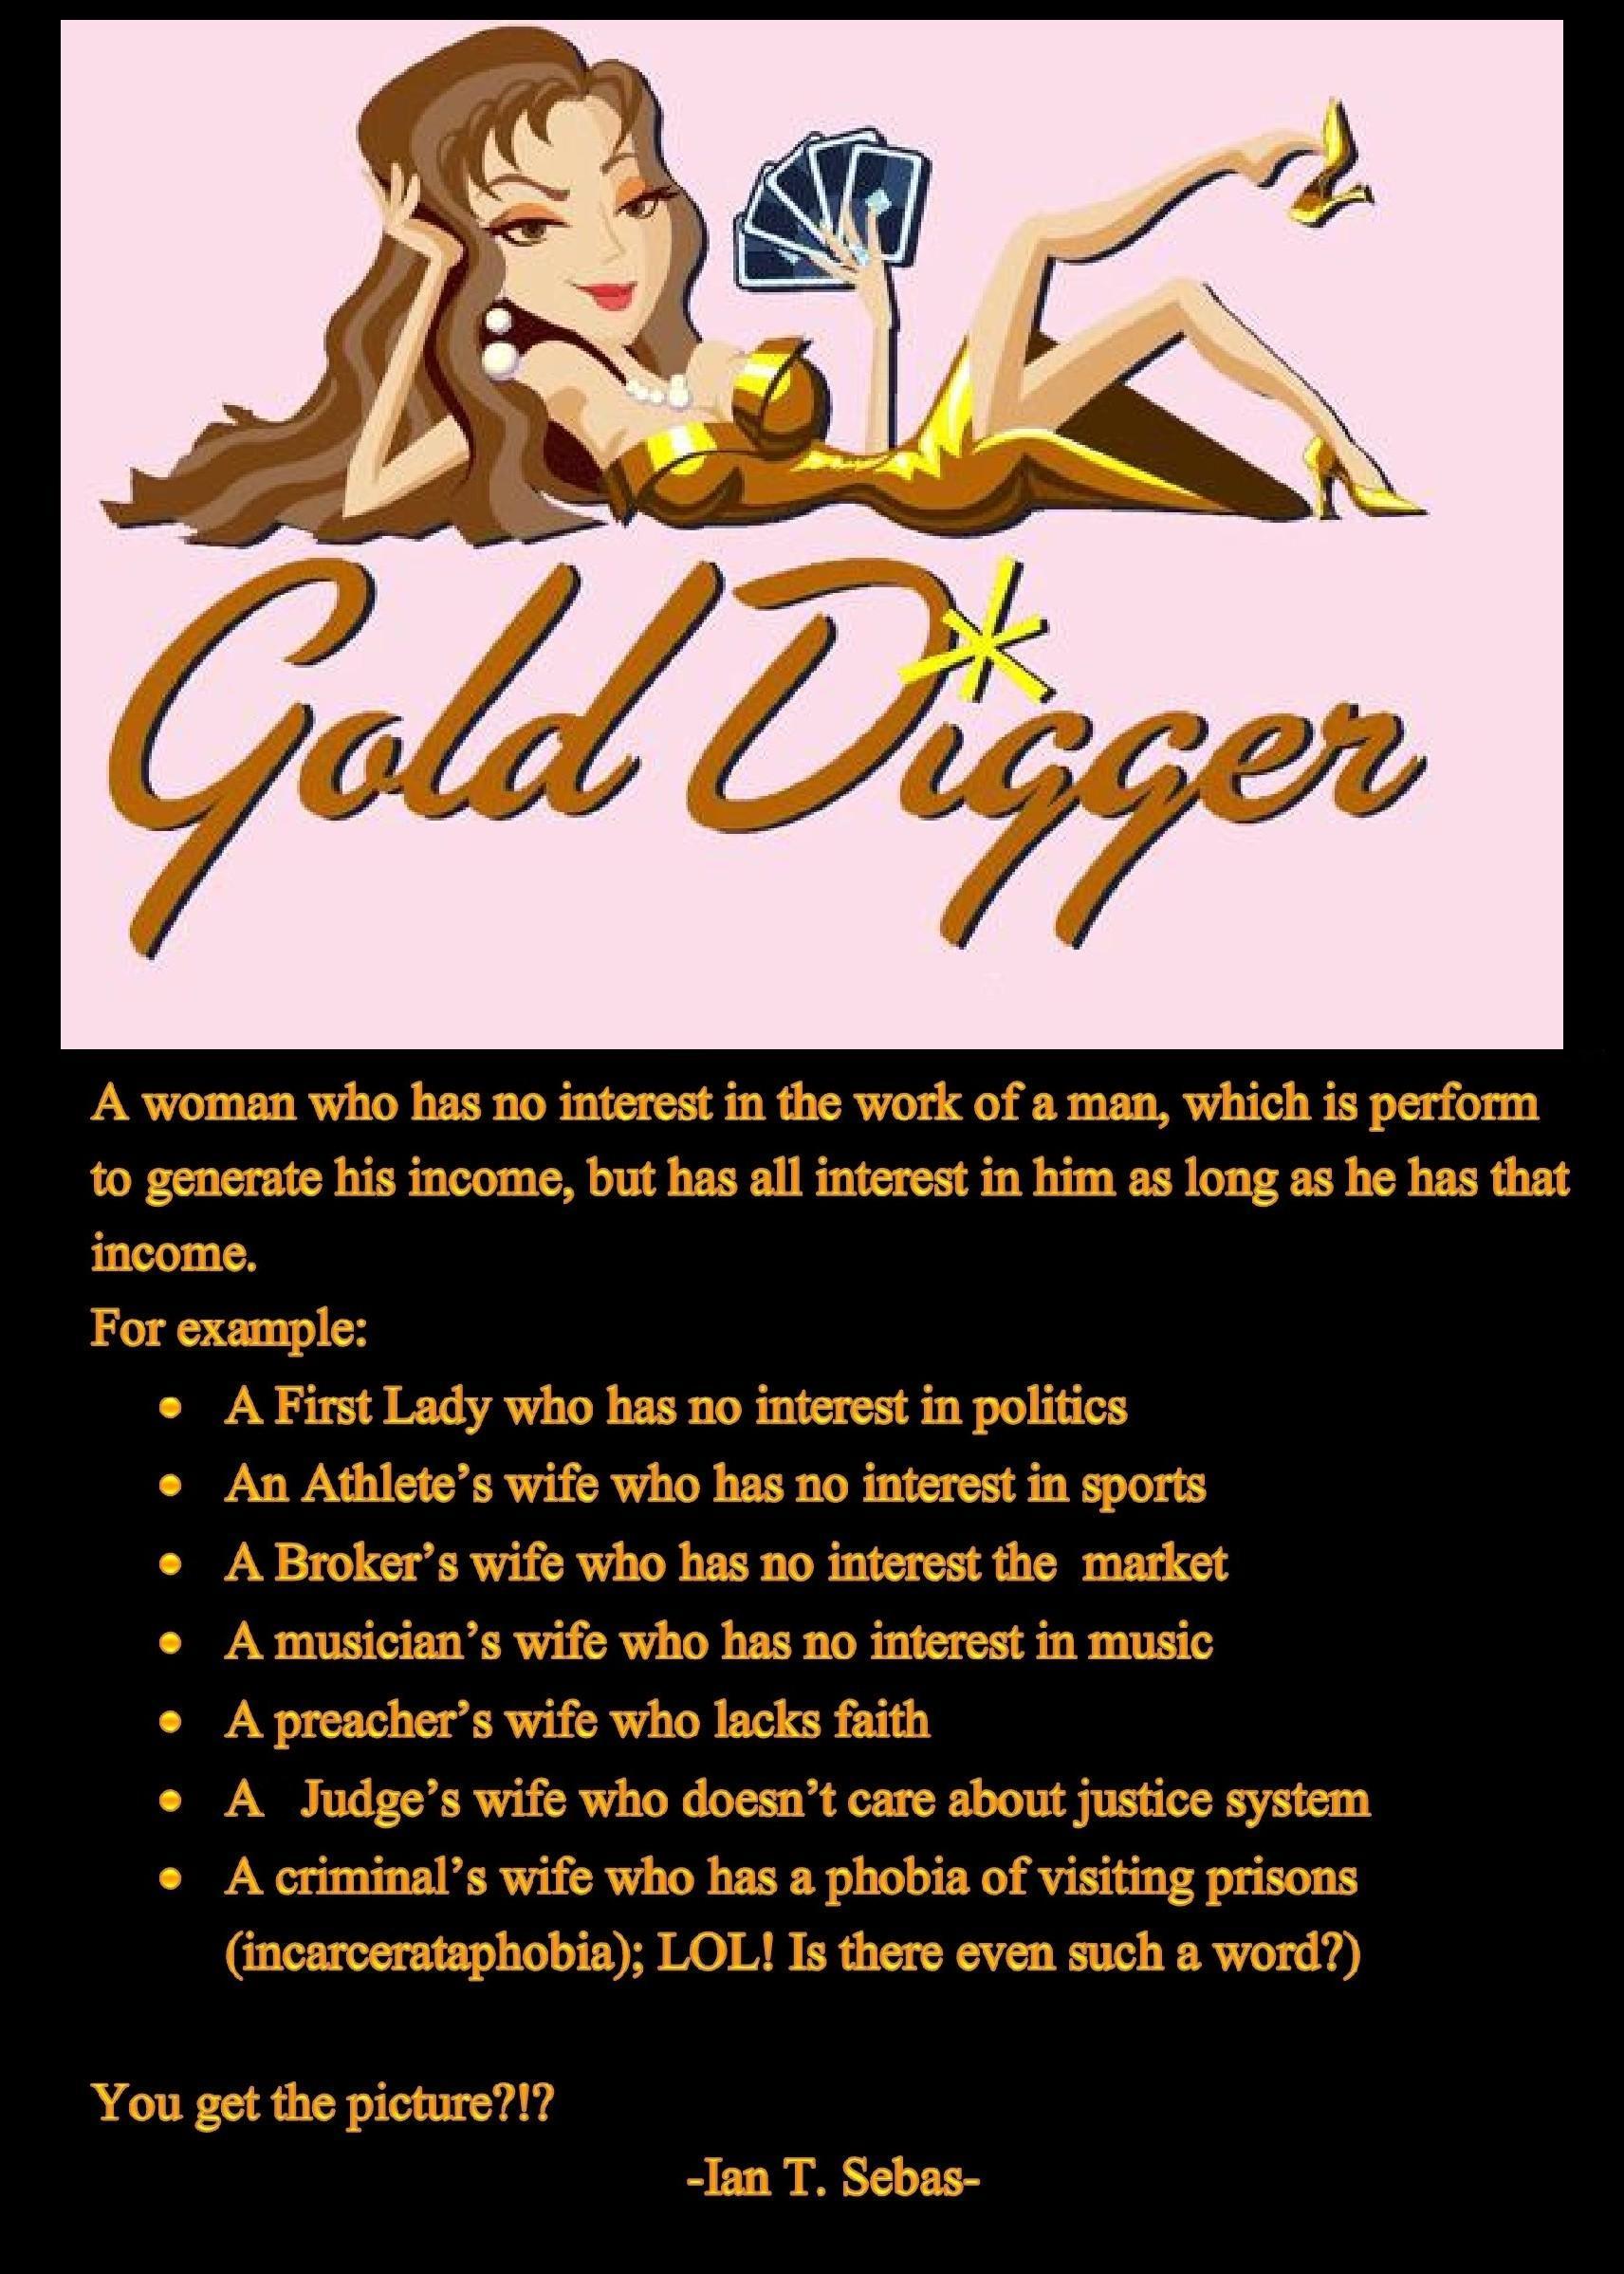 Definition & Meaning of Gold digger